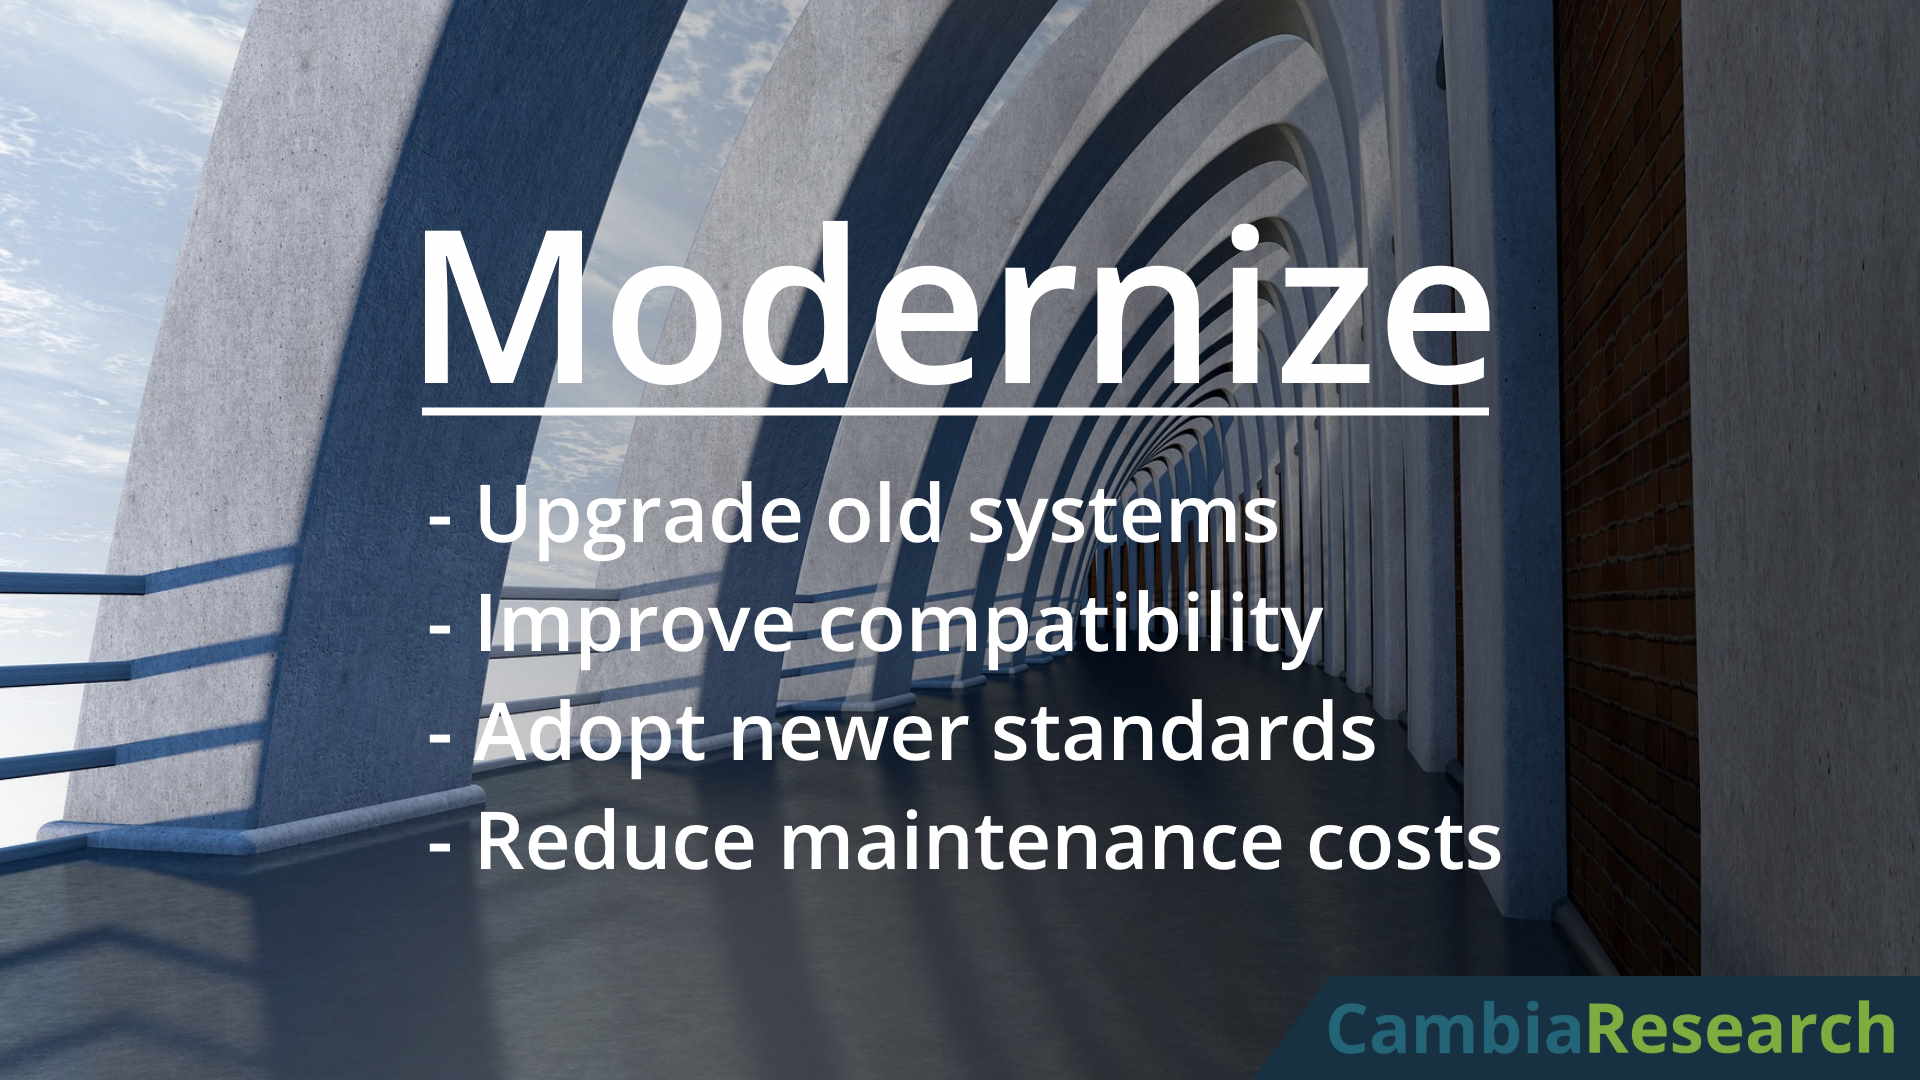 Kansas City companies can save money by modernizing their software with custom solutions.